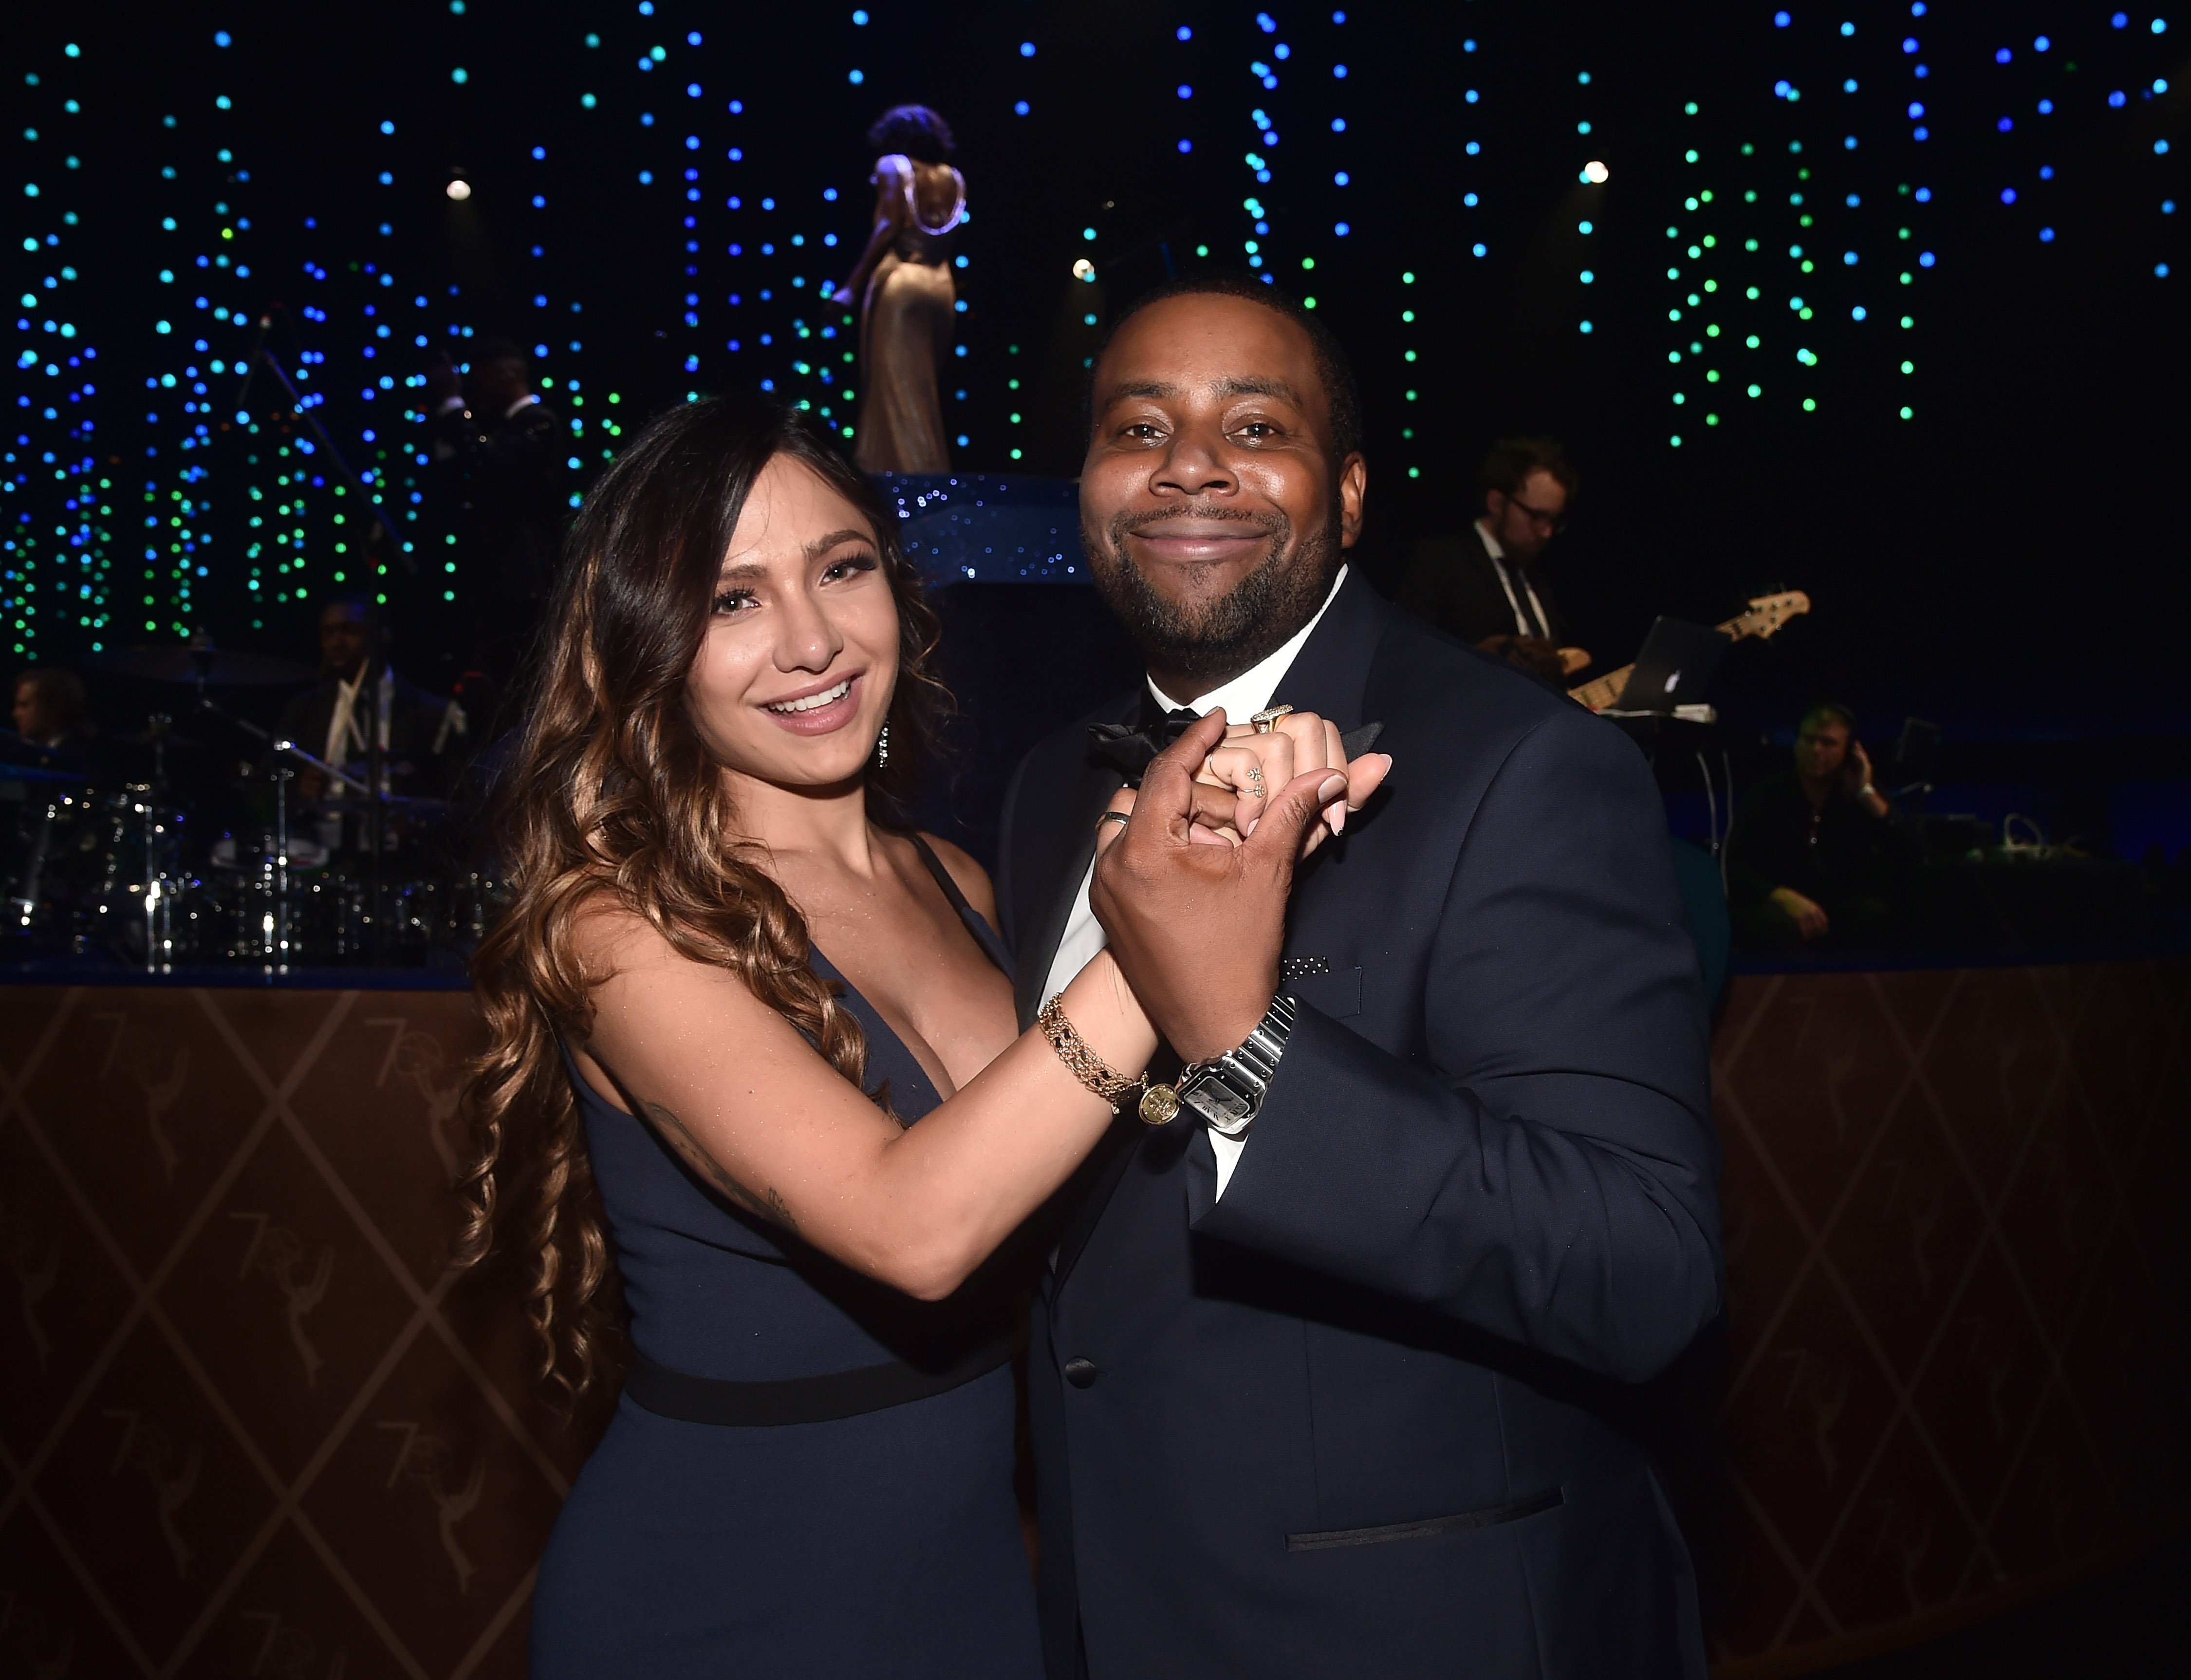 Christina Evangeline and Keenan Thompson attend the 2018 Creative Arts Ball at on September 9, 2018 in Los Angeles, California | Photo: GettyImages